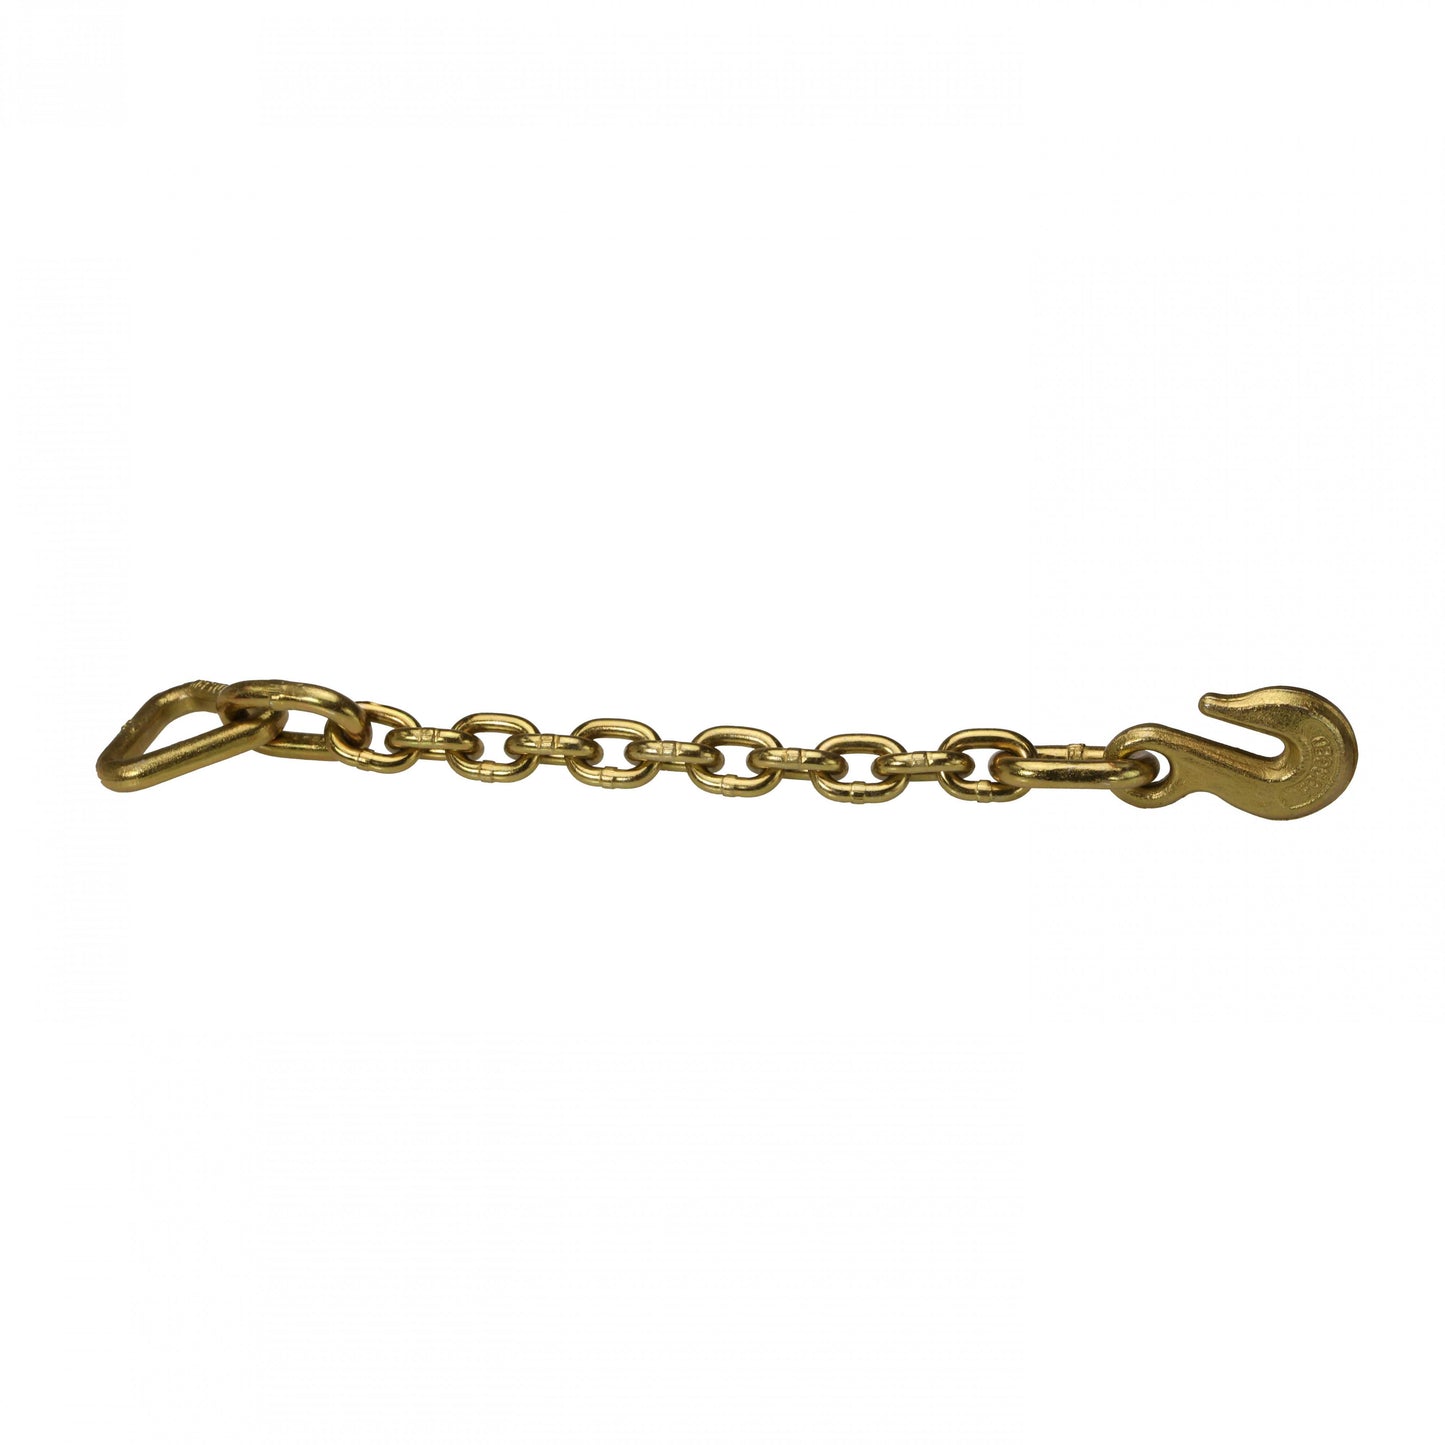 516 inch x 18 inch Chain Extension w 2 inch DRing 10000 lbs Break Strength image 1 of 2